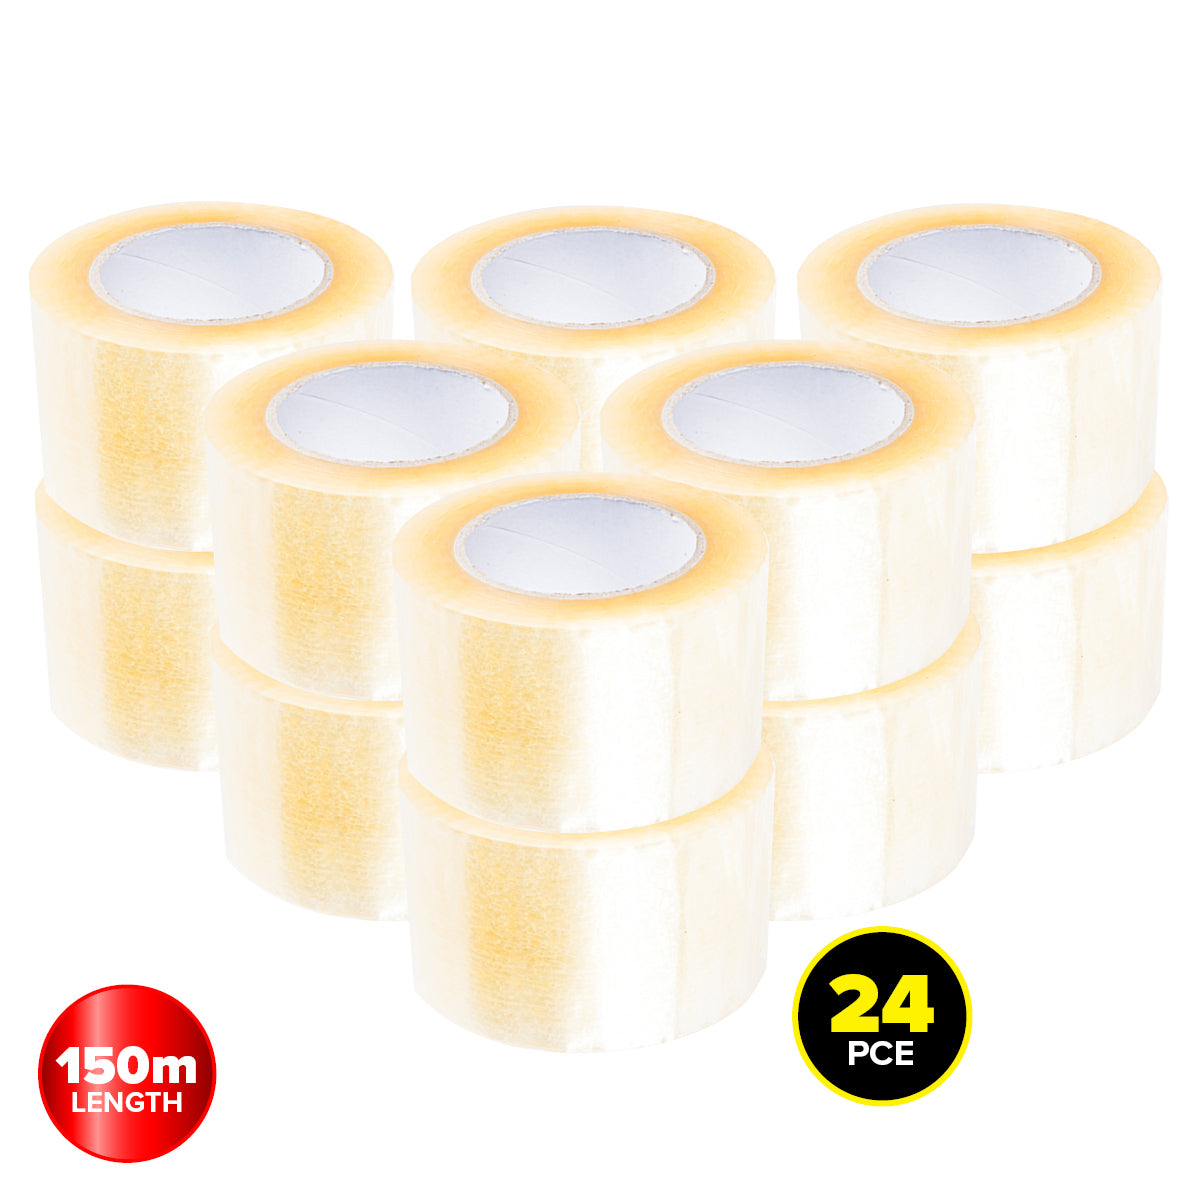 Handy Hardware 24Pce Packaging Tape Clear Multipurpose Extra Wide